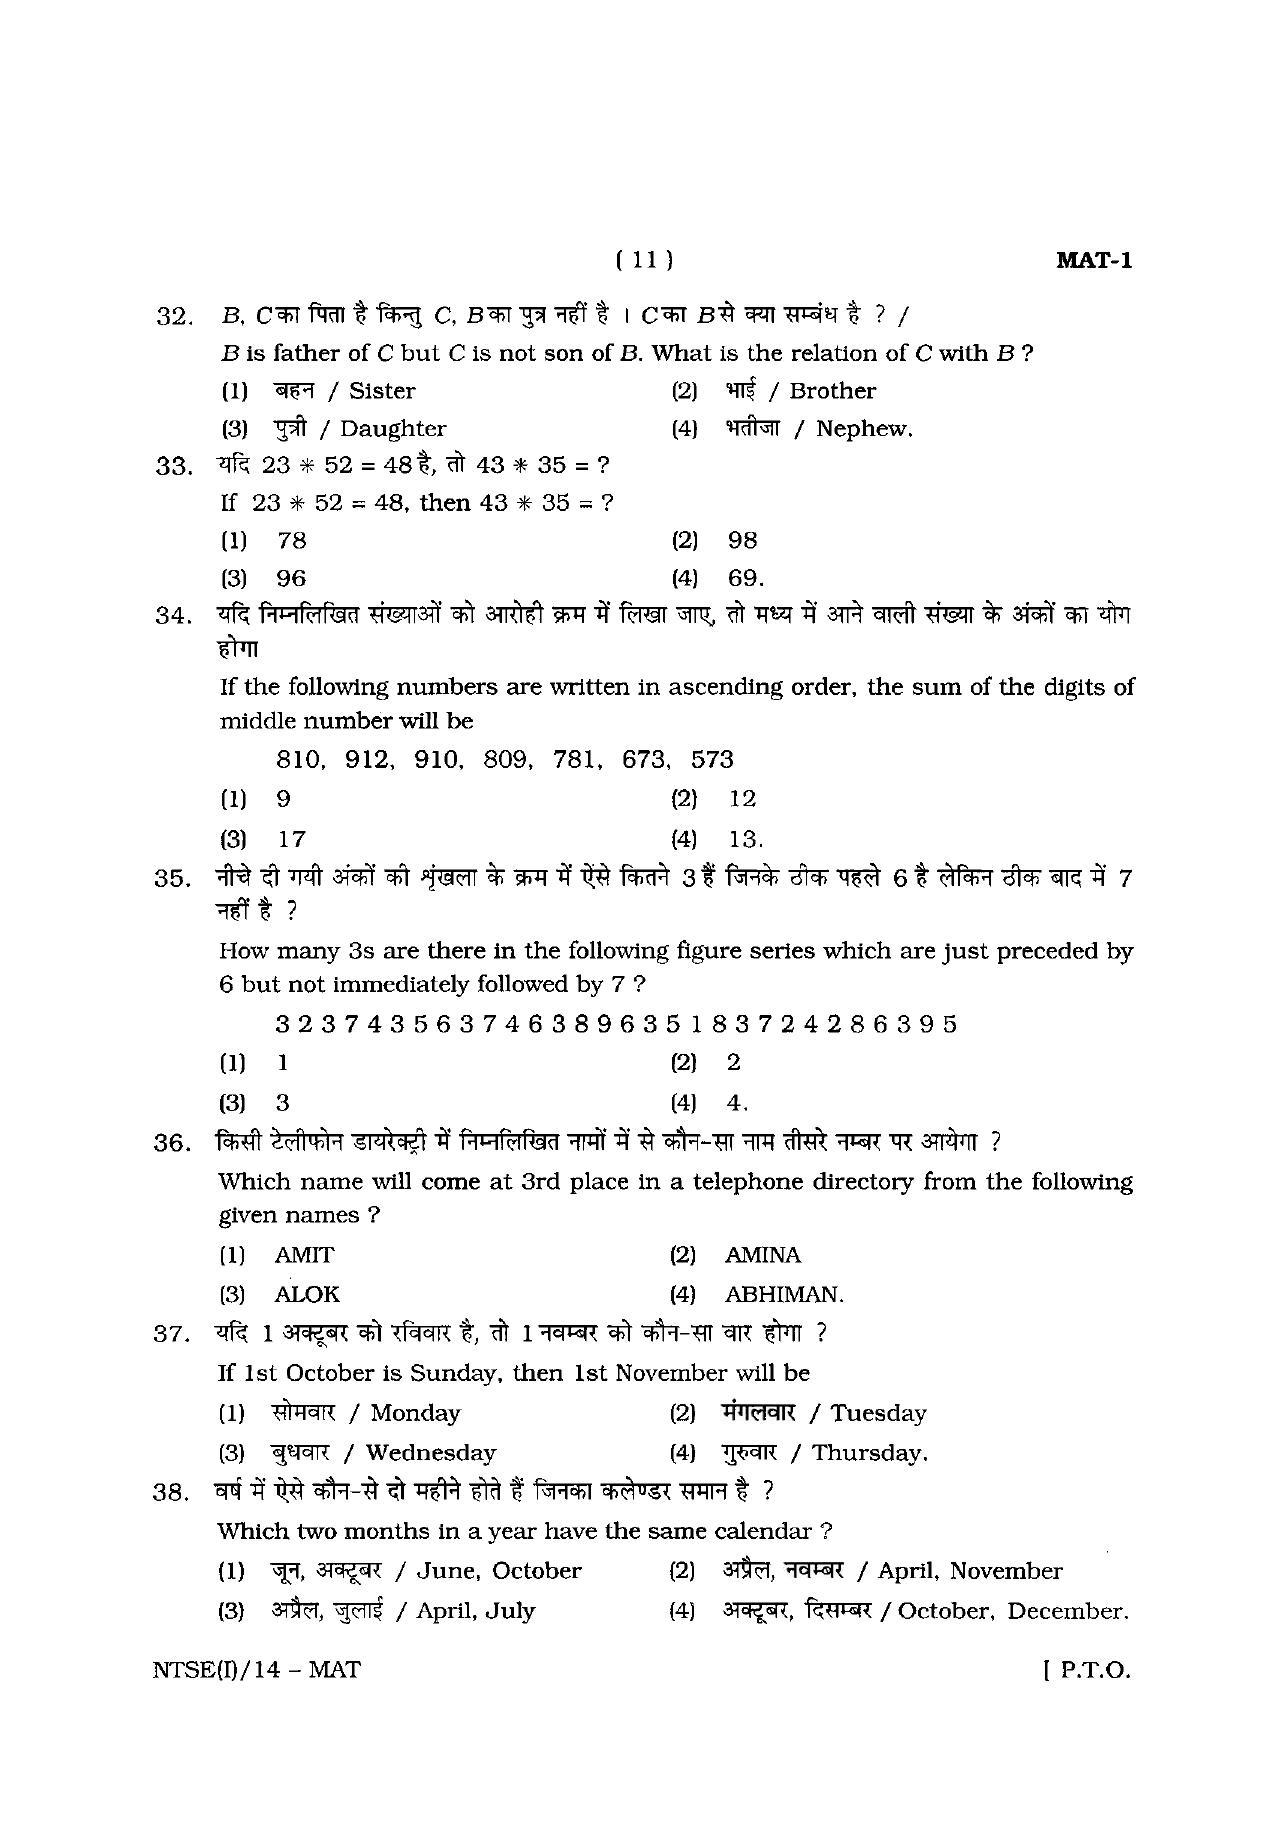 NTSE 2014 (Stage II) MAT Question Paper - Page 11